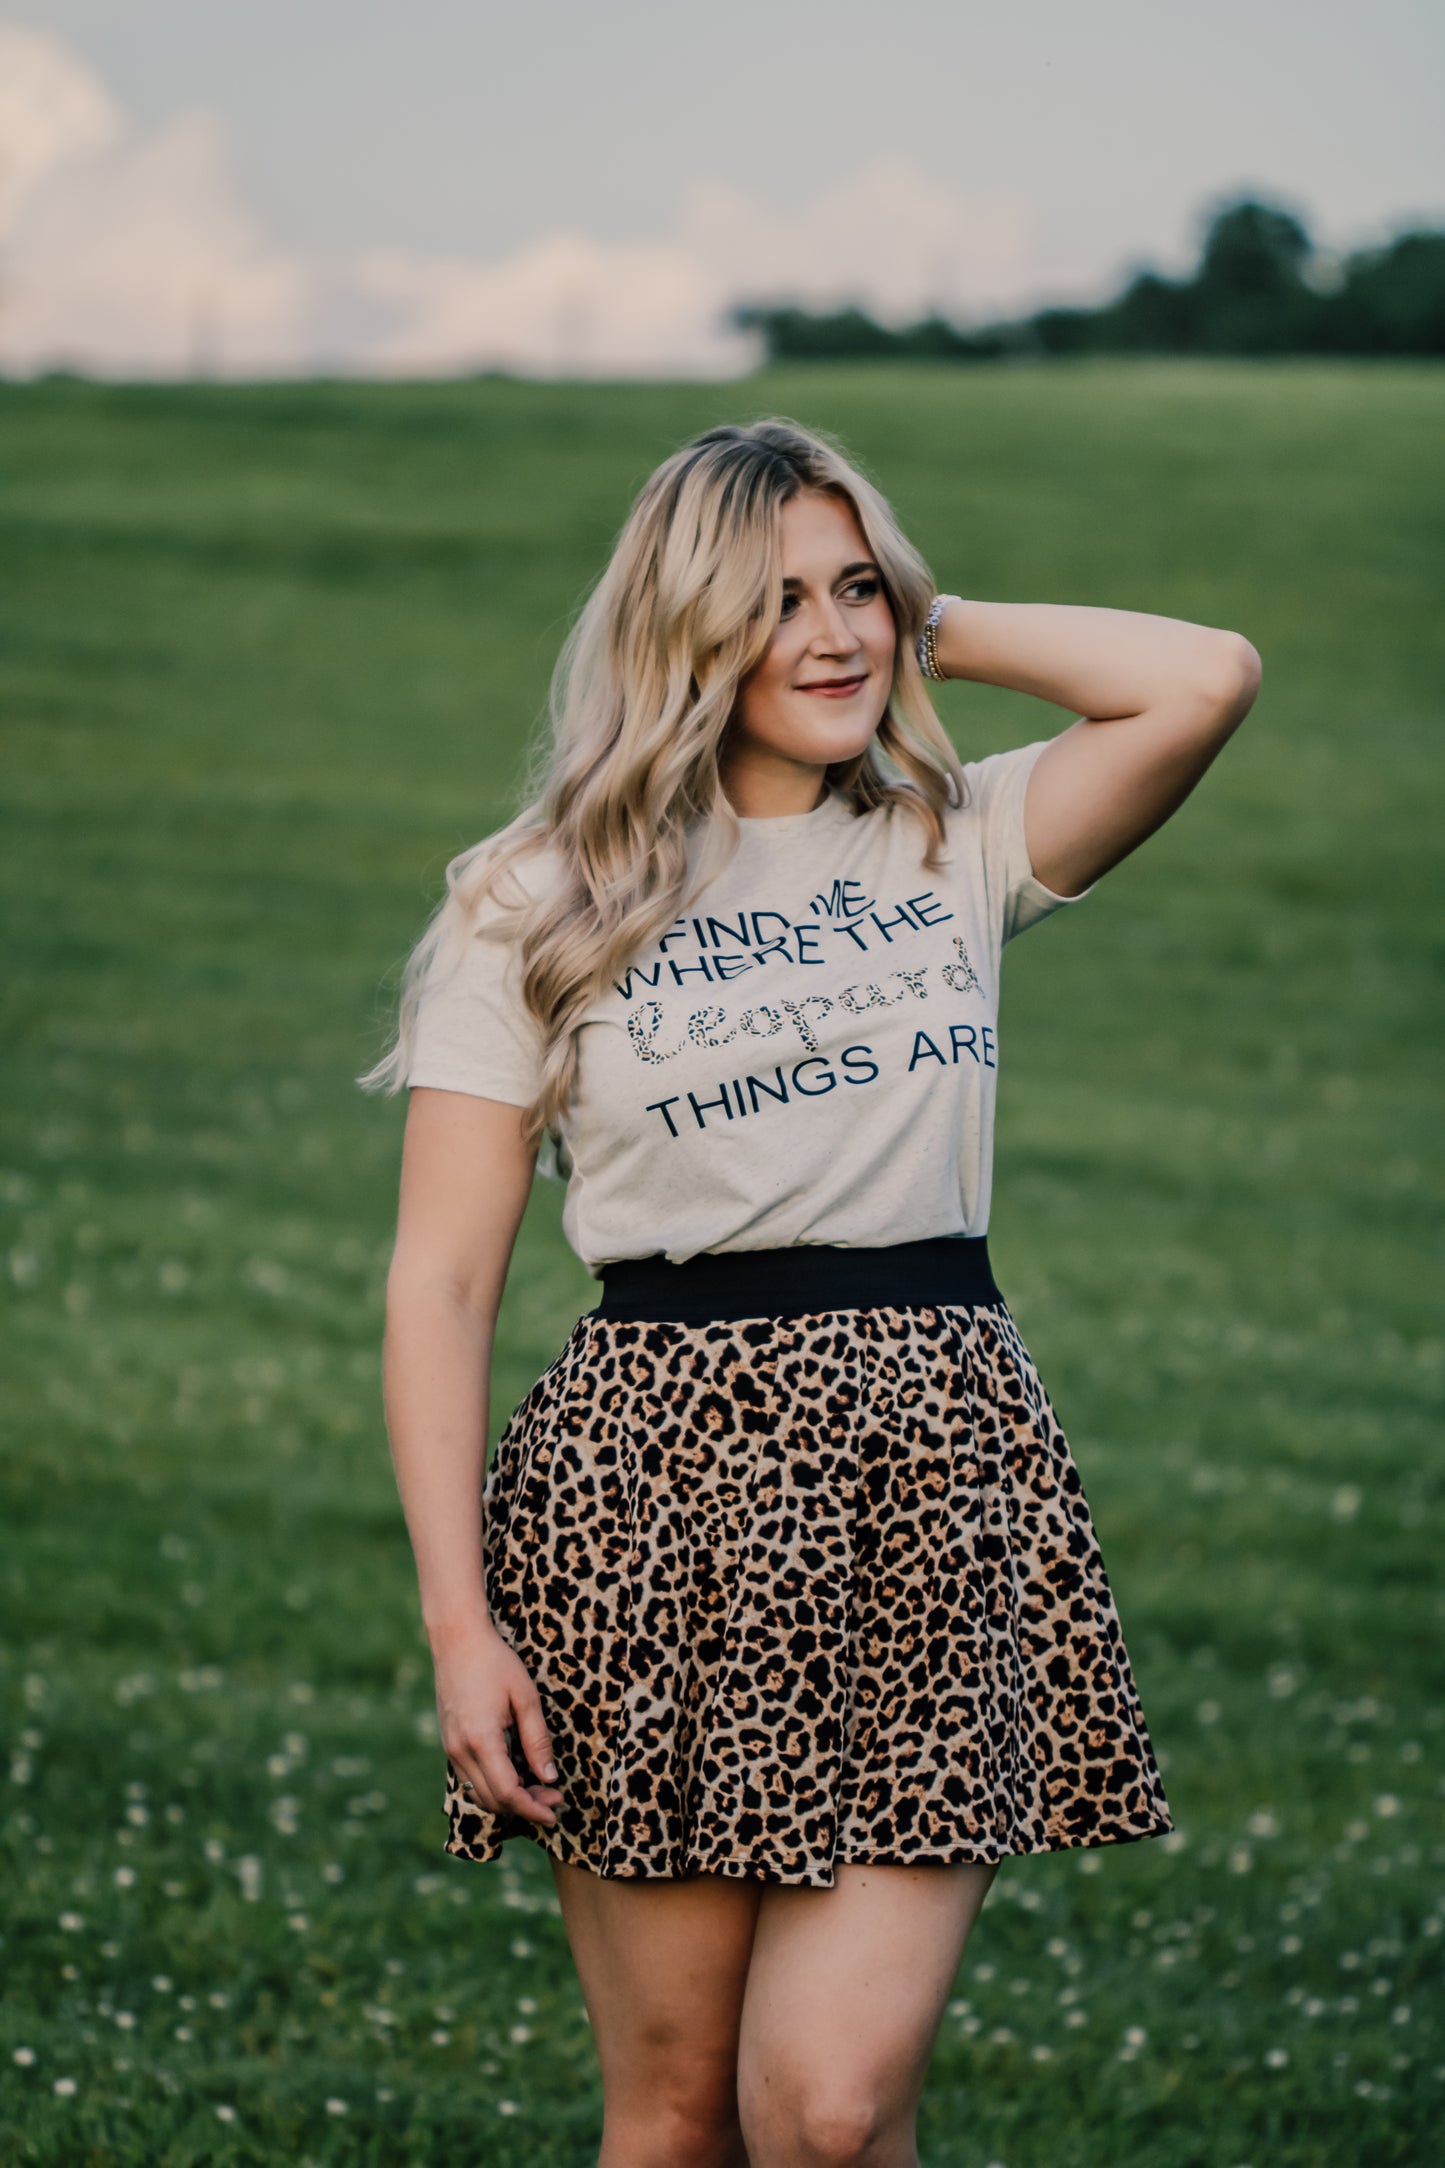 Find Me Where the Leopard Things Are - Graphic Tee